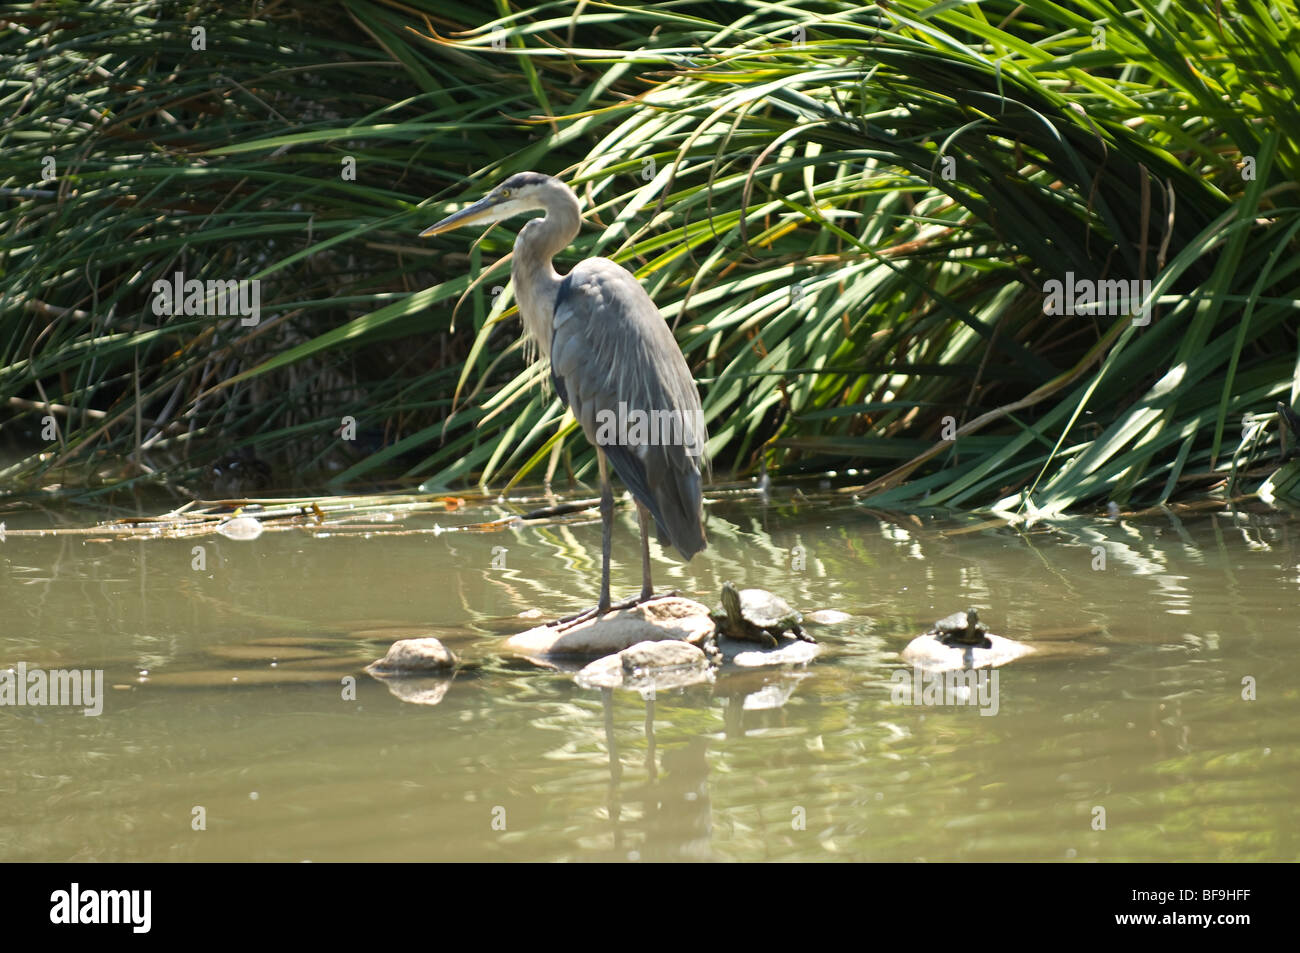 Blue Heron standing on some rocks with small turtles in a pond. Stock Photo